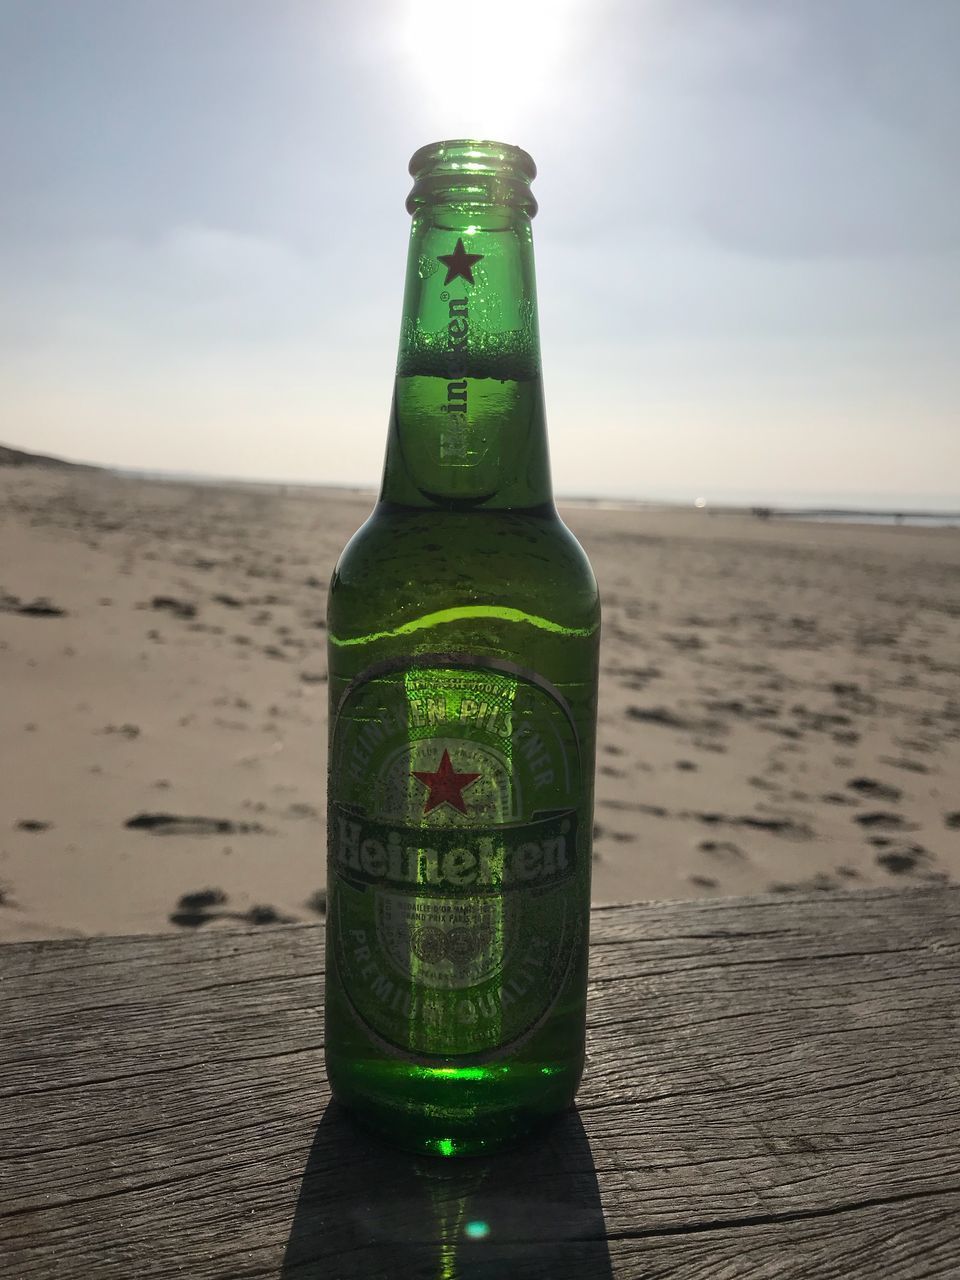 CLOSE-UP OF BEER BOTTLE ON TABLE AT BEACH